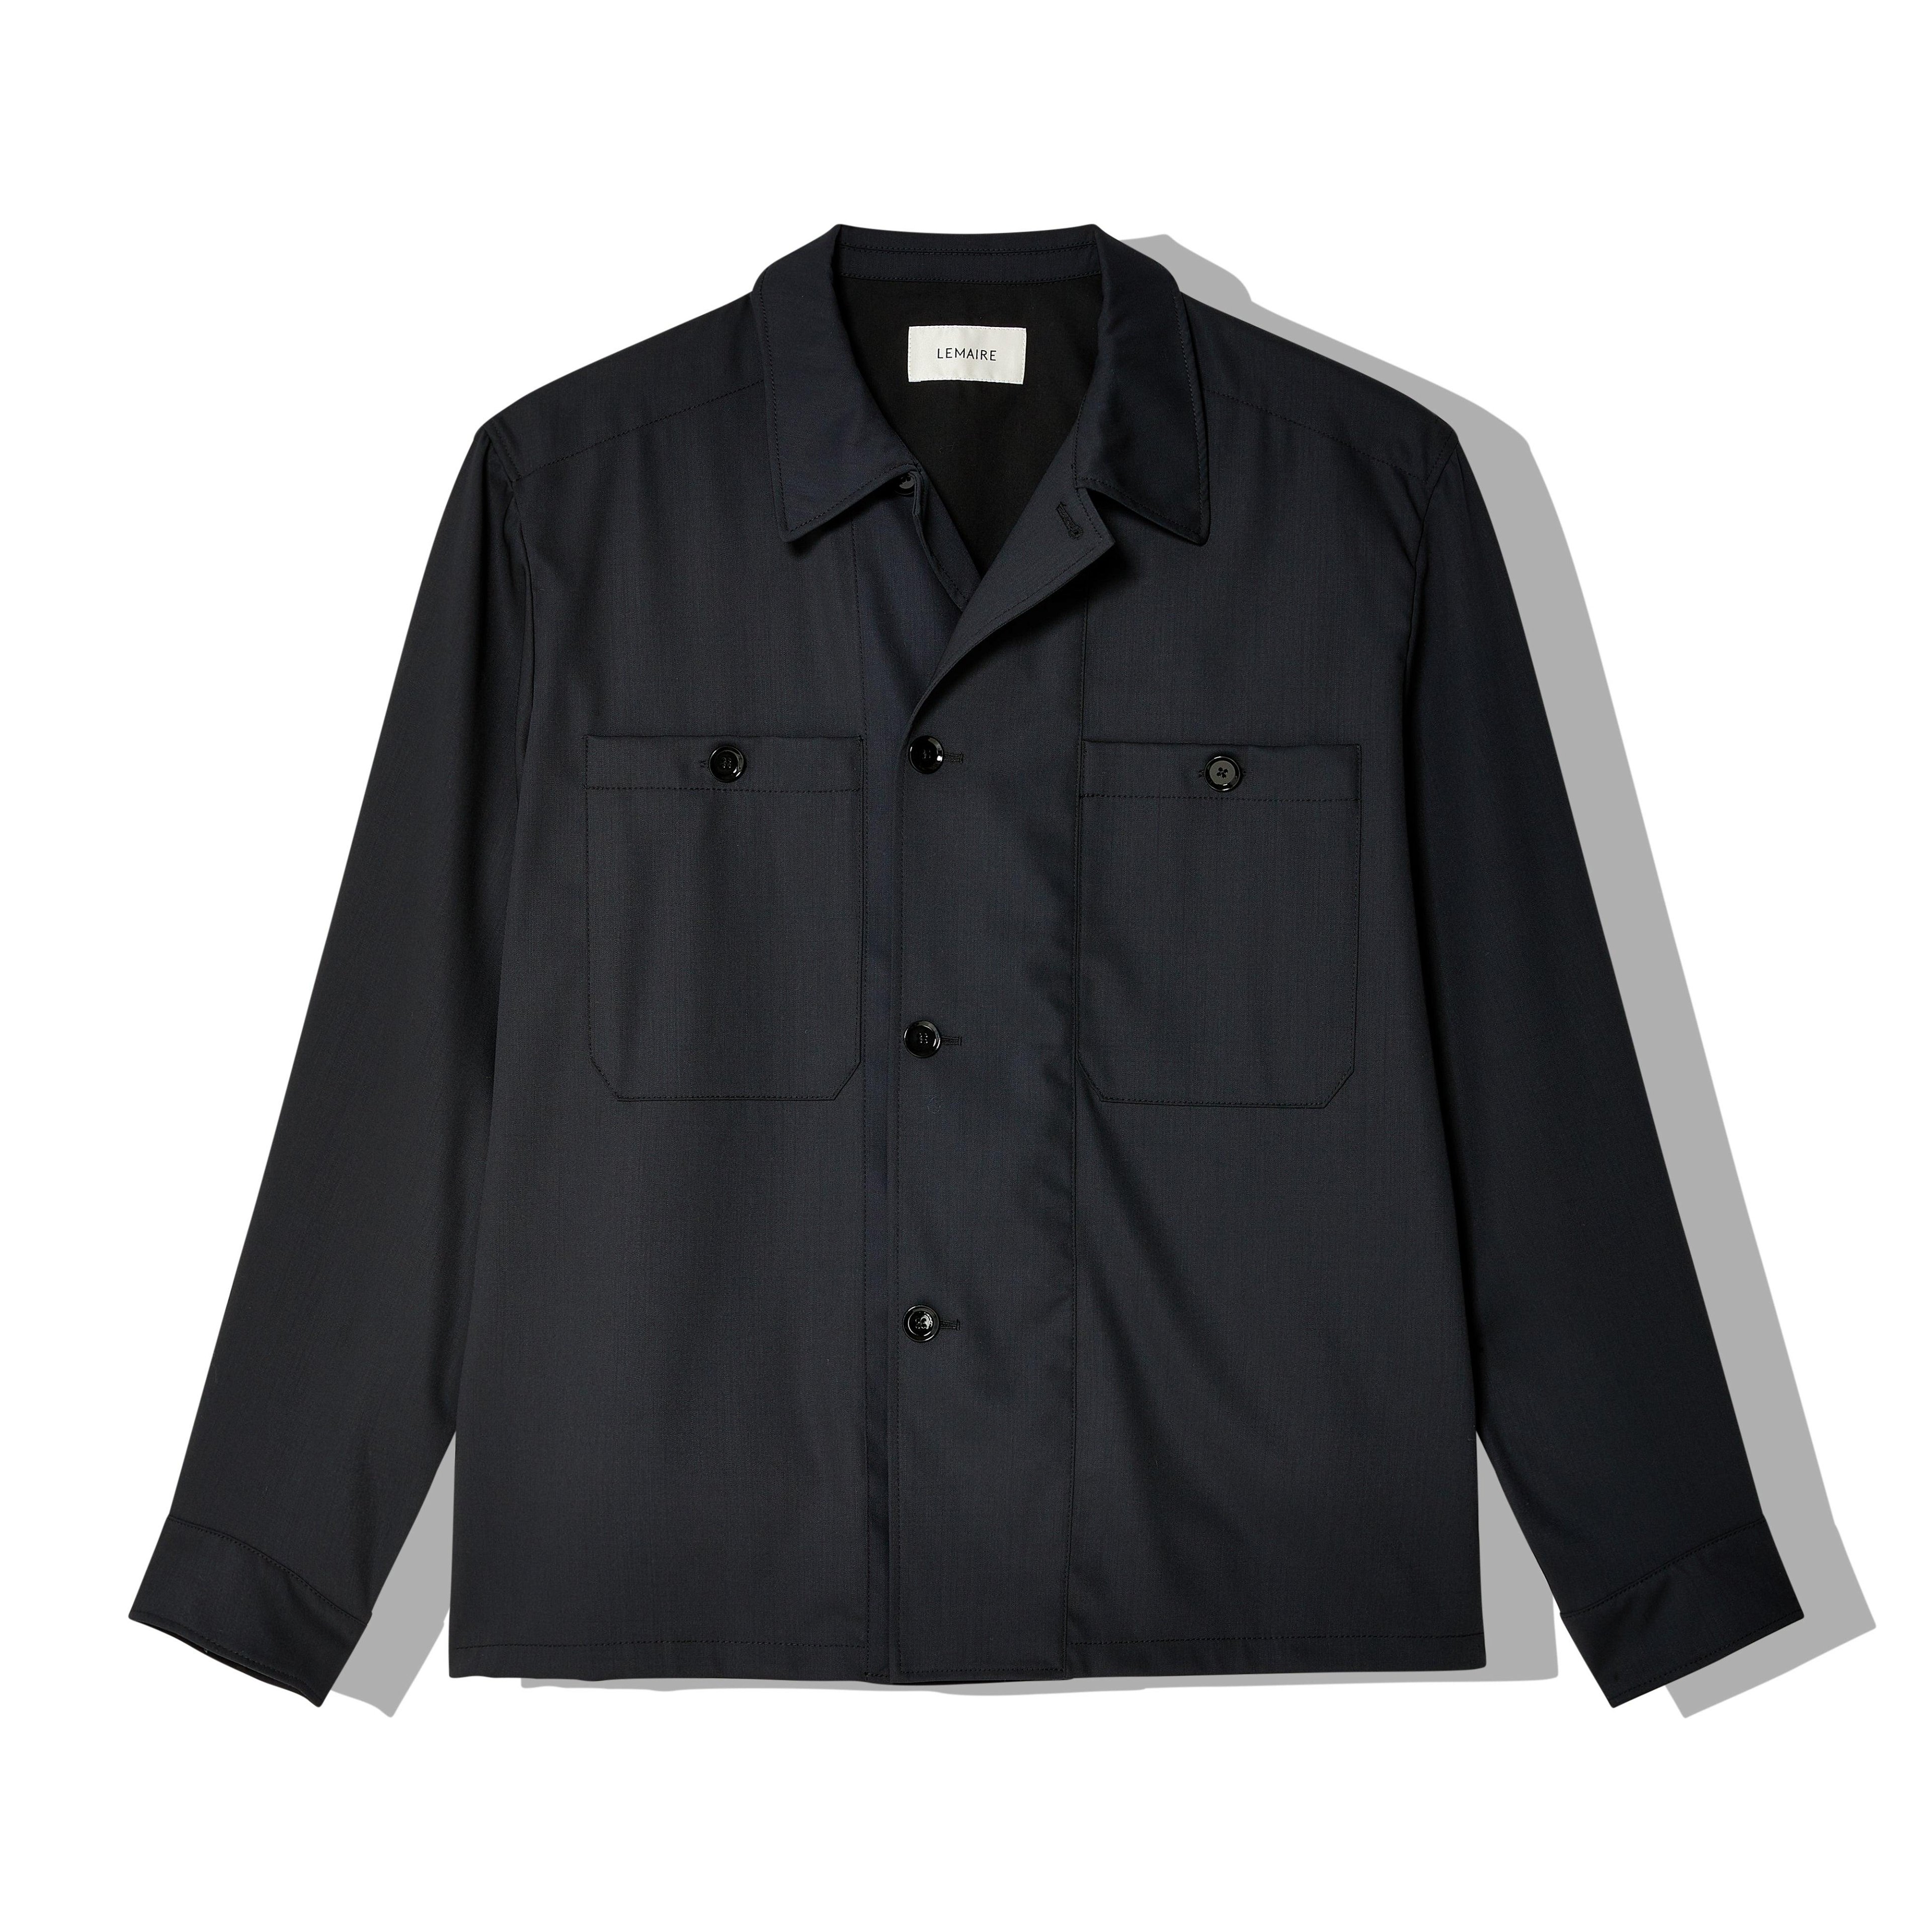 Lemaire - Men's Soft Military Overshirt - (Jet Black) by LEMAIRE